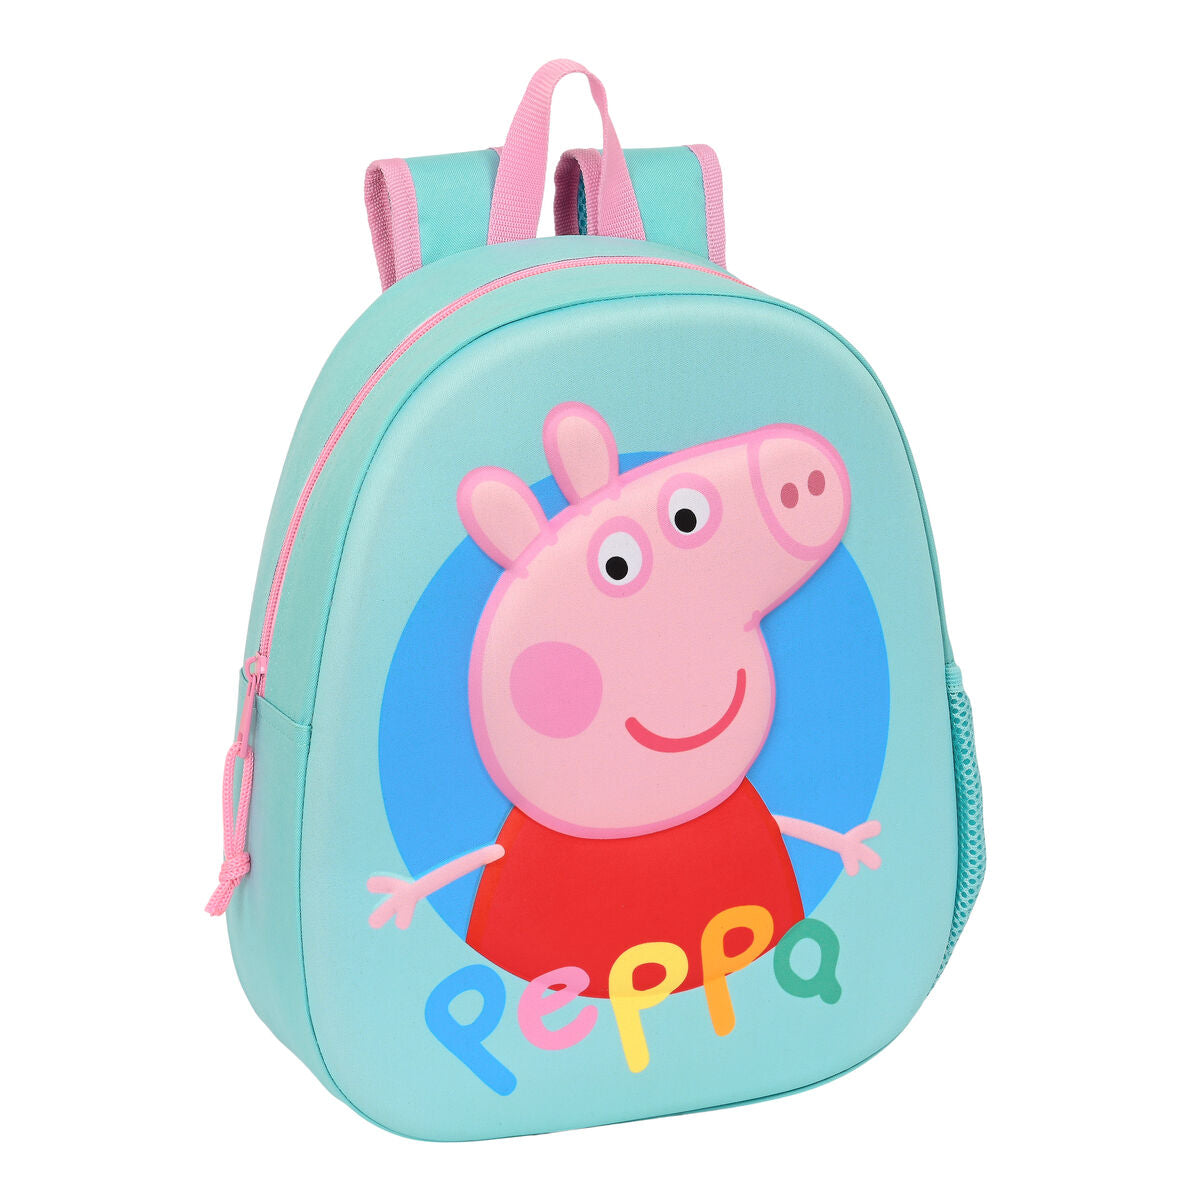 Buy Peppa Pig George Pig with Dino Round Plush Sling Bag 16 Cm Online at  Low Prices in India - Amazon.in